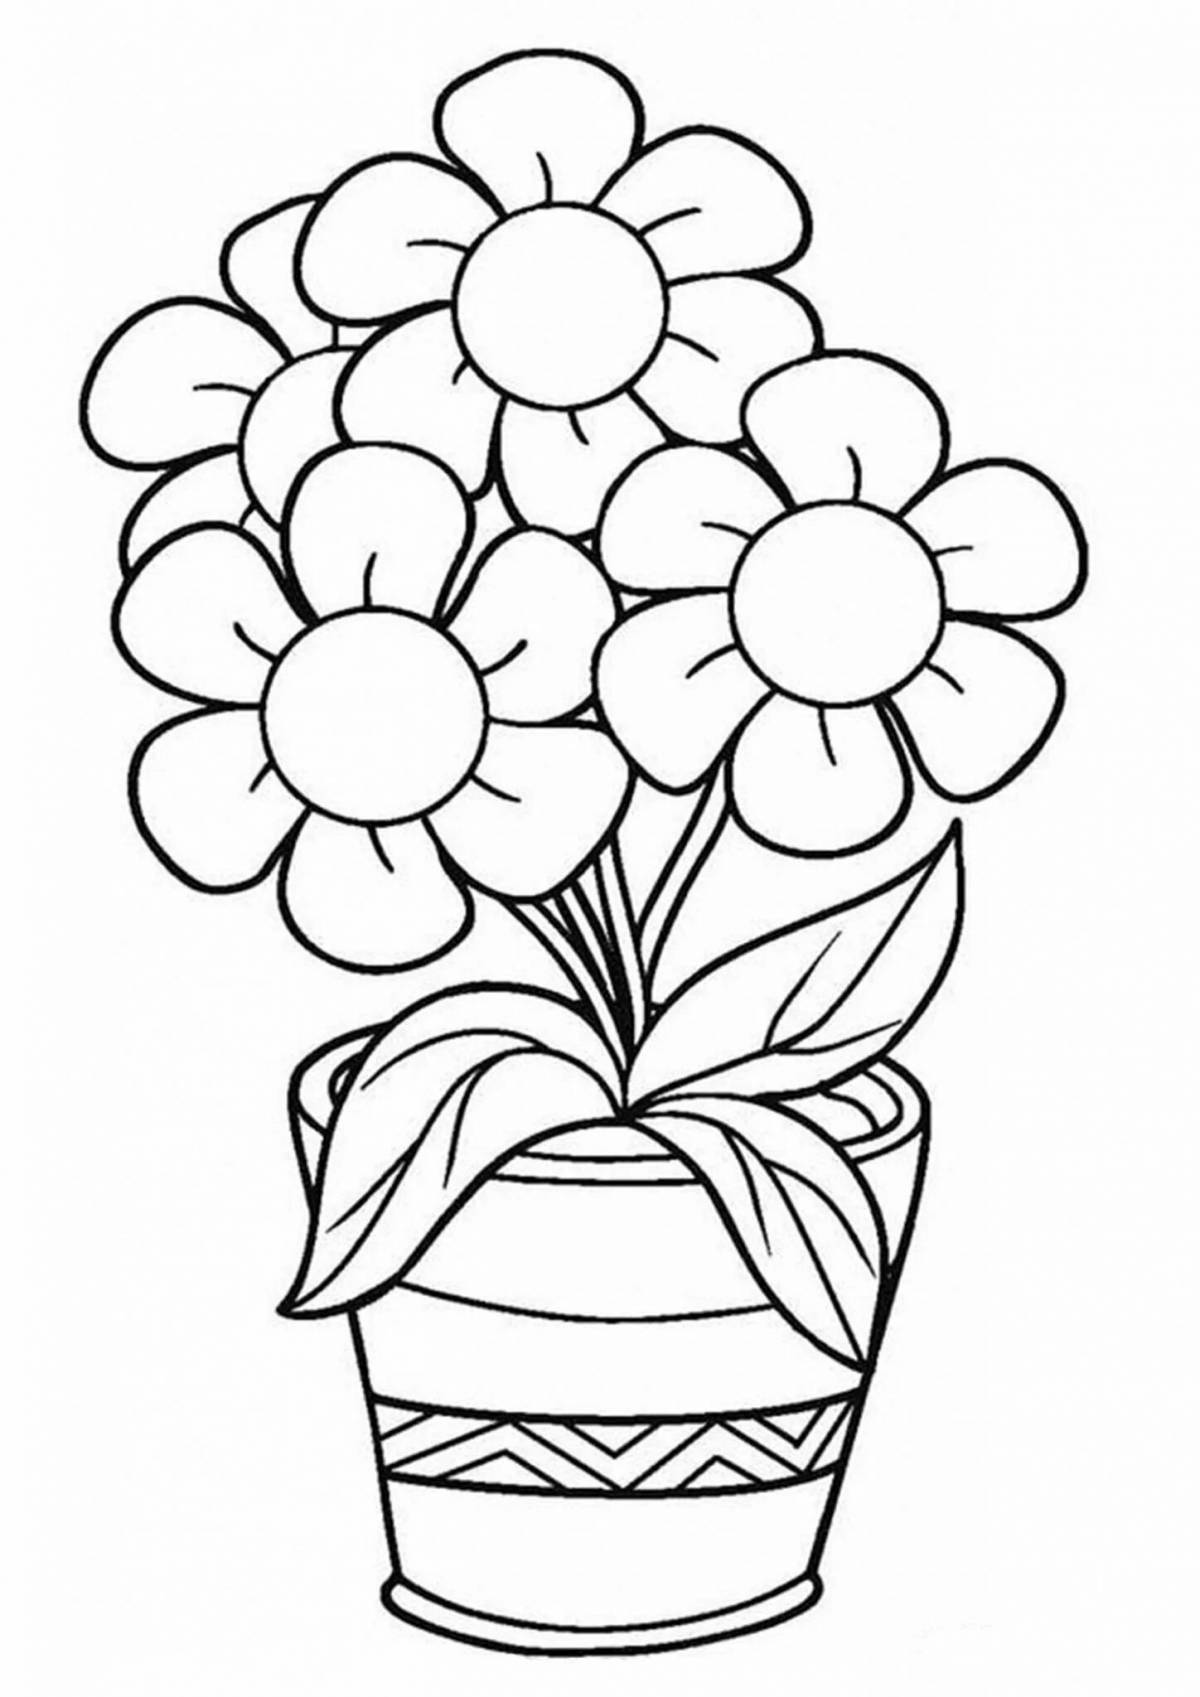 Delightful vase of flowers coloring book for children 5-6 years old